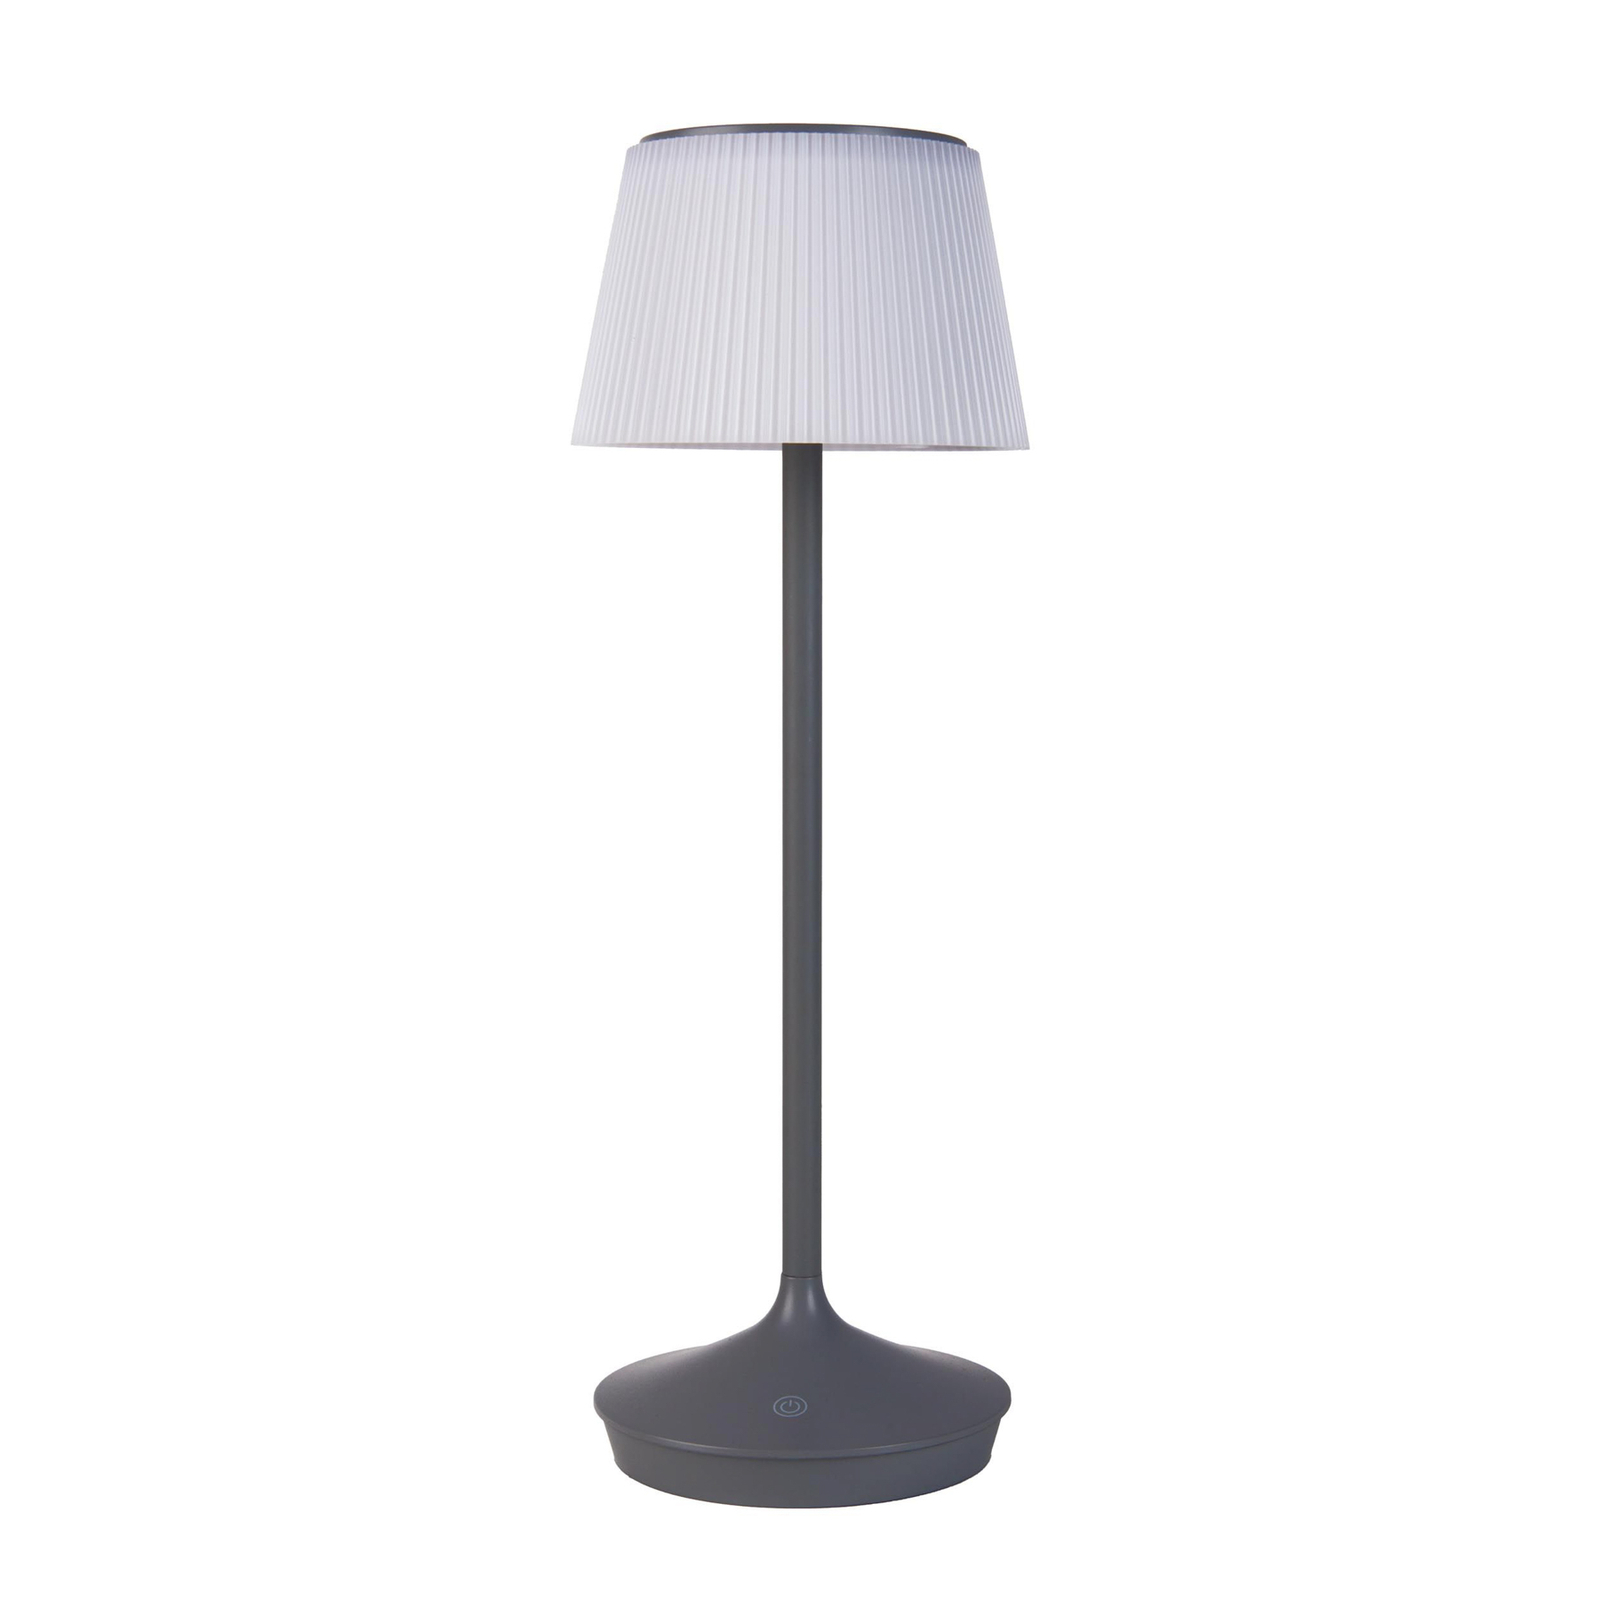 Lampe table solaire LED Emmi CCT recharge, grise